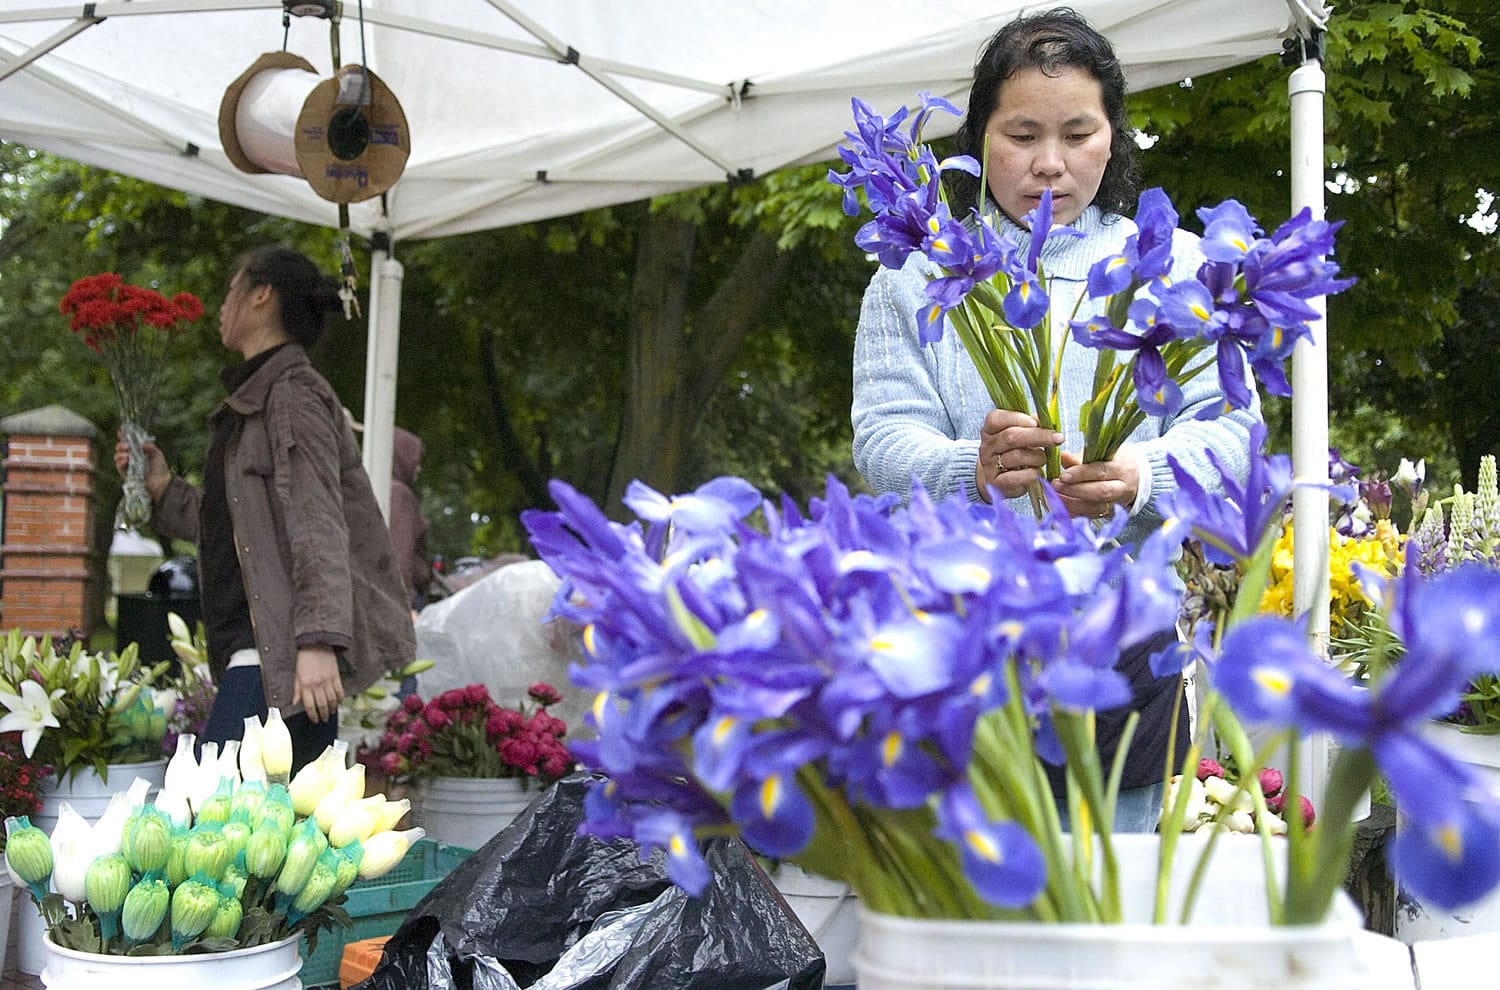 Columbian files
Ker Chang, right, and daughter Hlee set up their Chang Summer Bloom booth at the opening night of the Vancouver Farmers Market Friday in 2010. They grow all their own flowers in Woodburn, Ore.